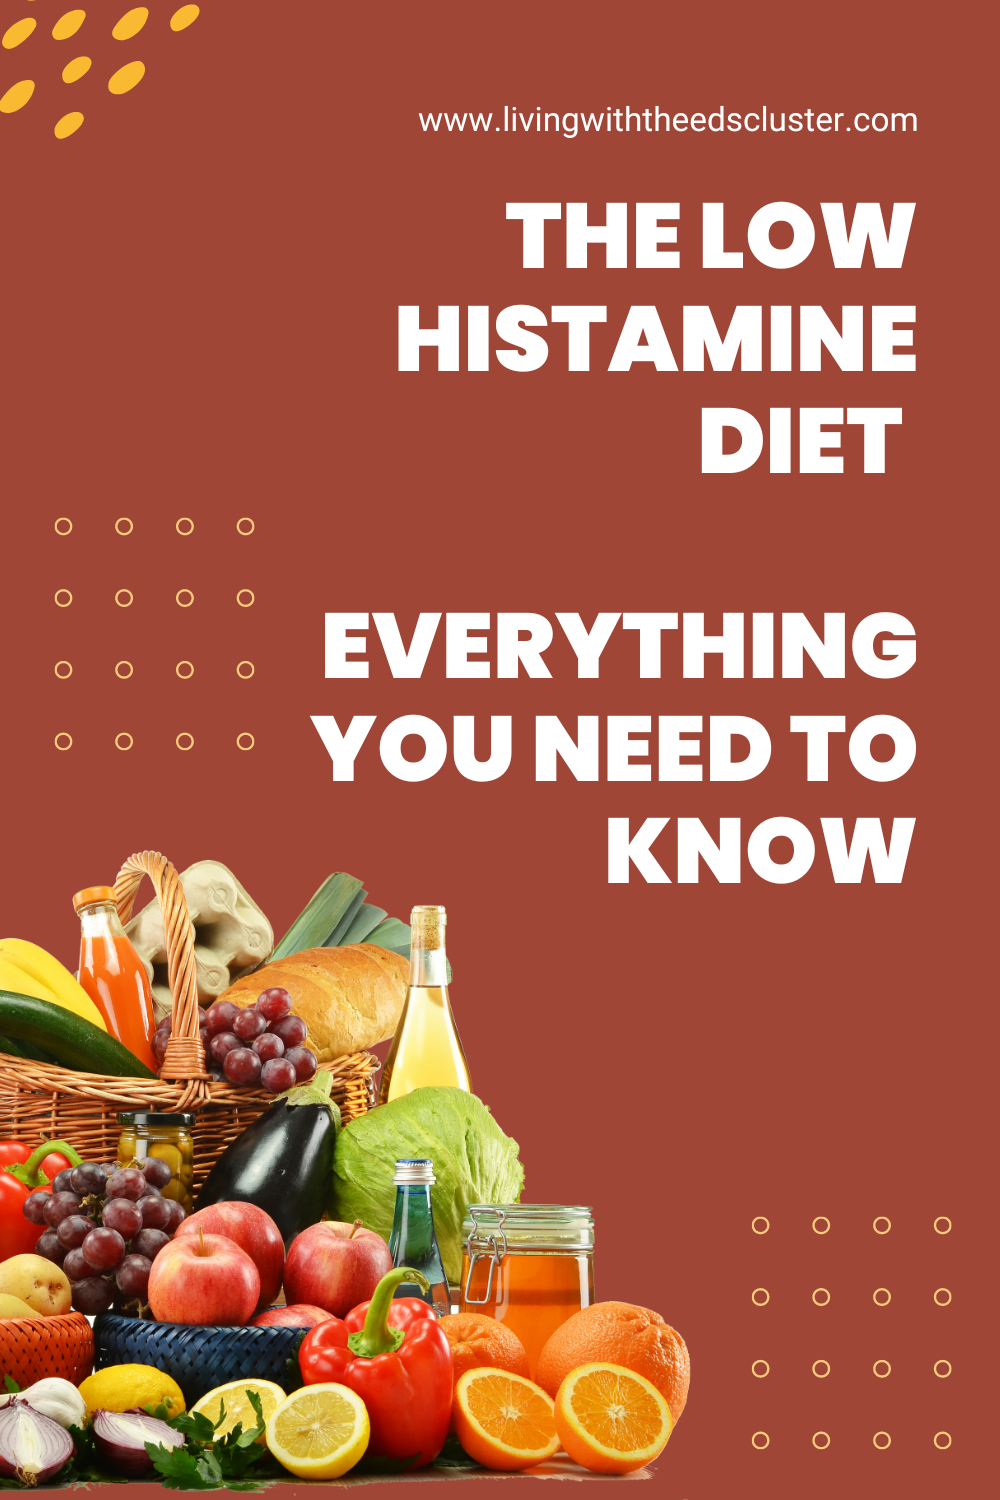 The Low Histamine Diet – Everything You Need To Know